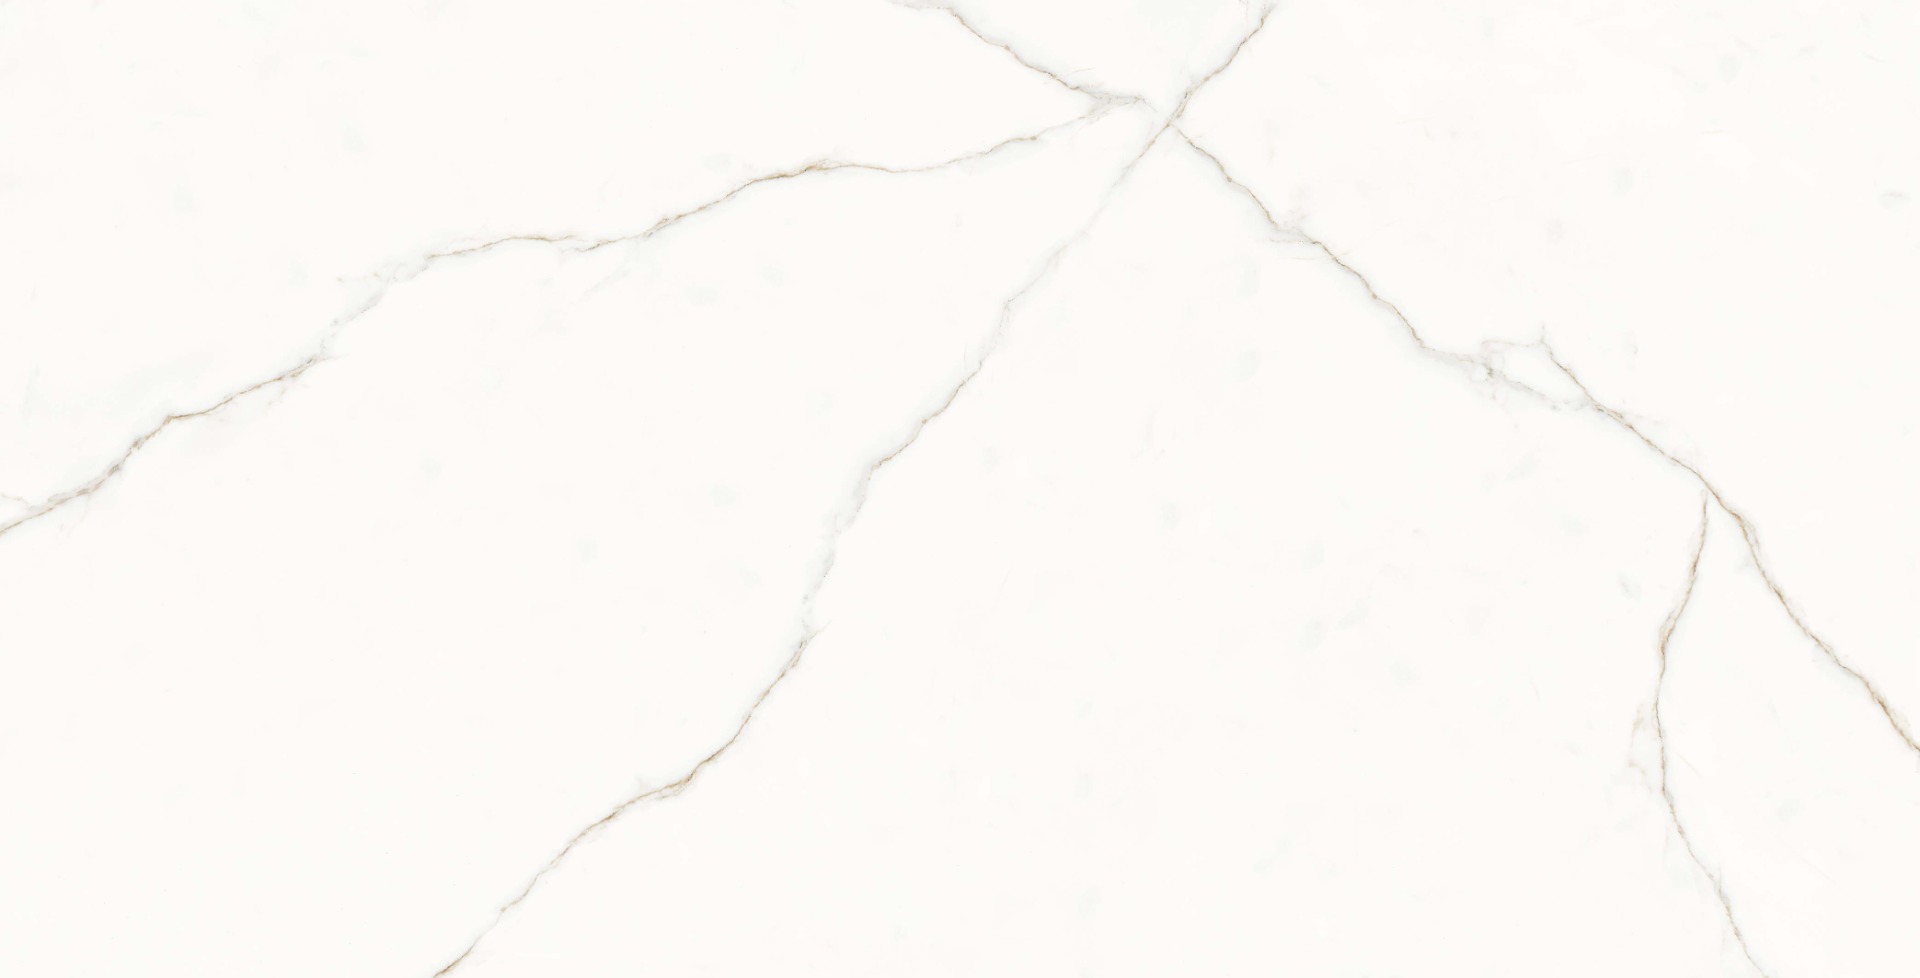 Marble Tiles for Bathroom Tiles, Living Room Tiles, Bedroom Tiles, Accent Tiles, Hospital Tiles, High Traffic Tiles, Commercial/Office, School & Collages